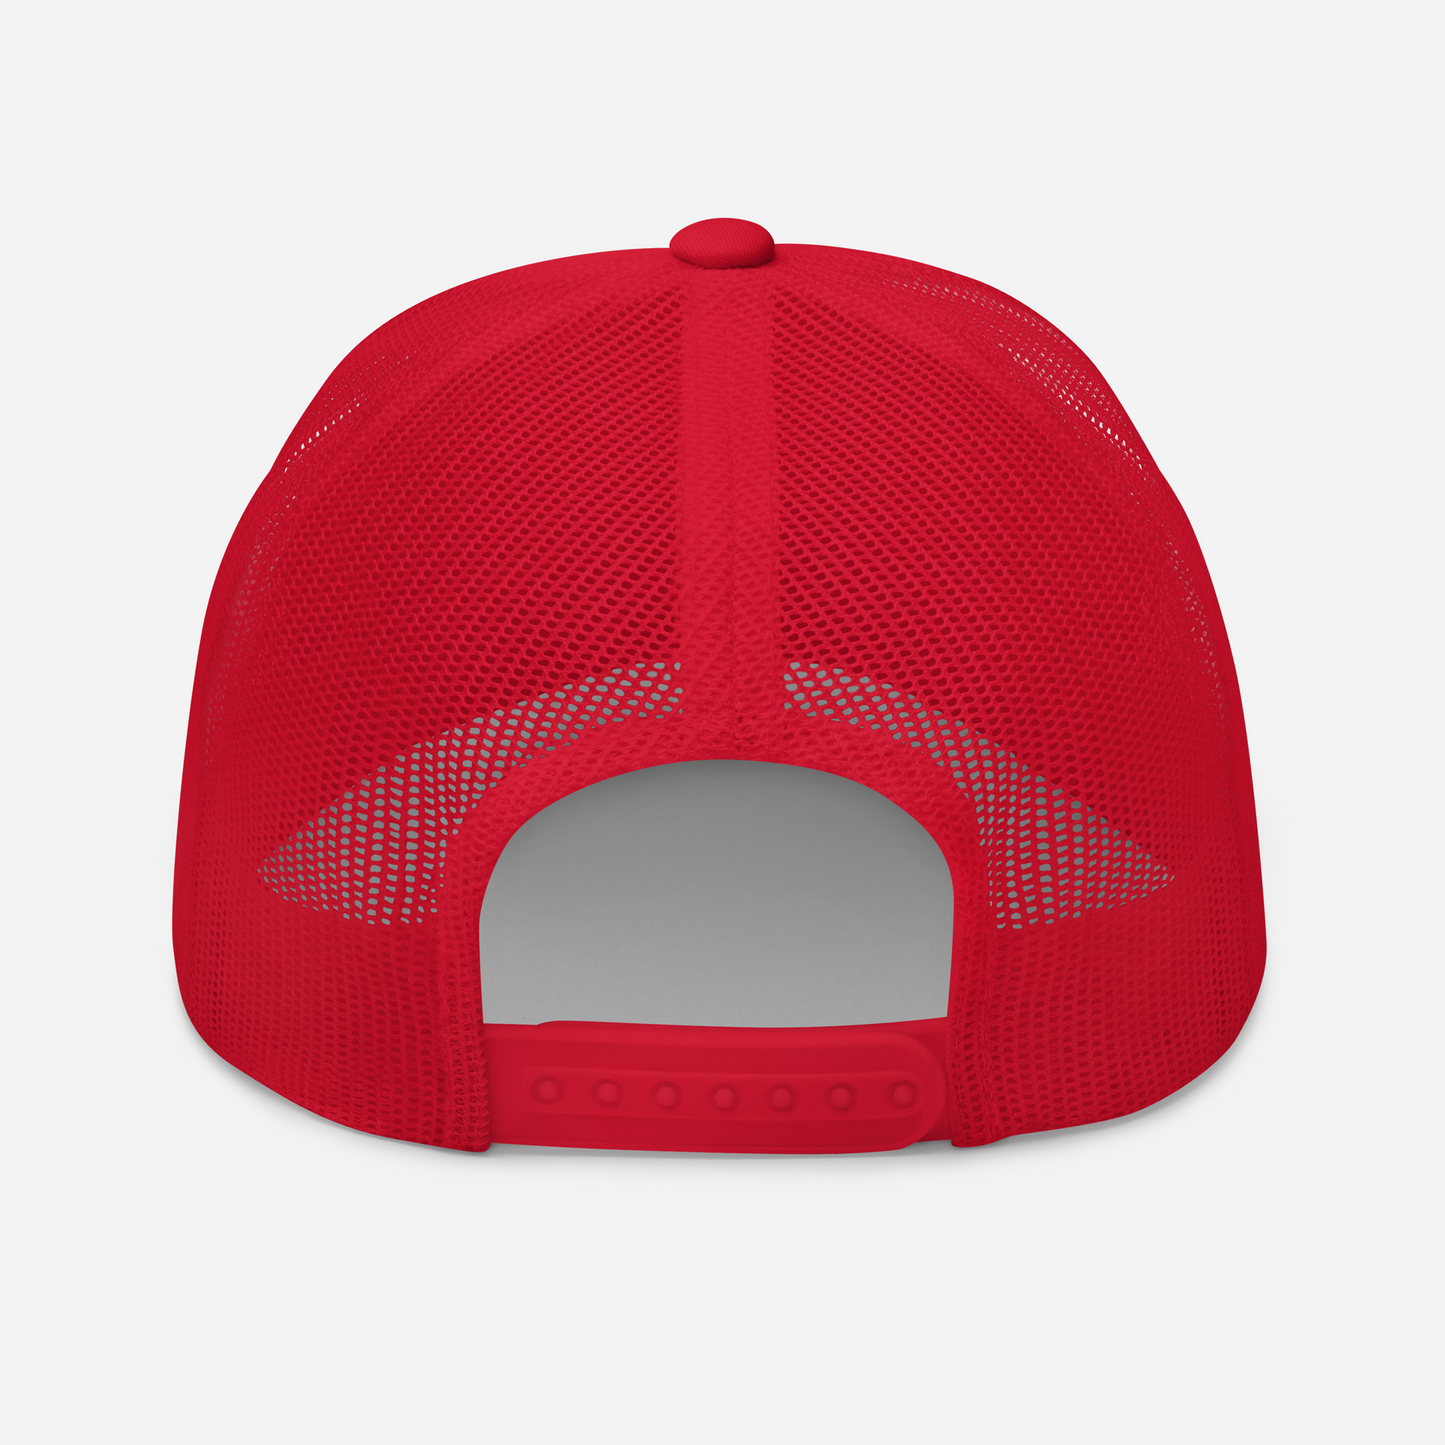 the Trucker Hat of Arcane Style